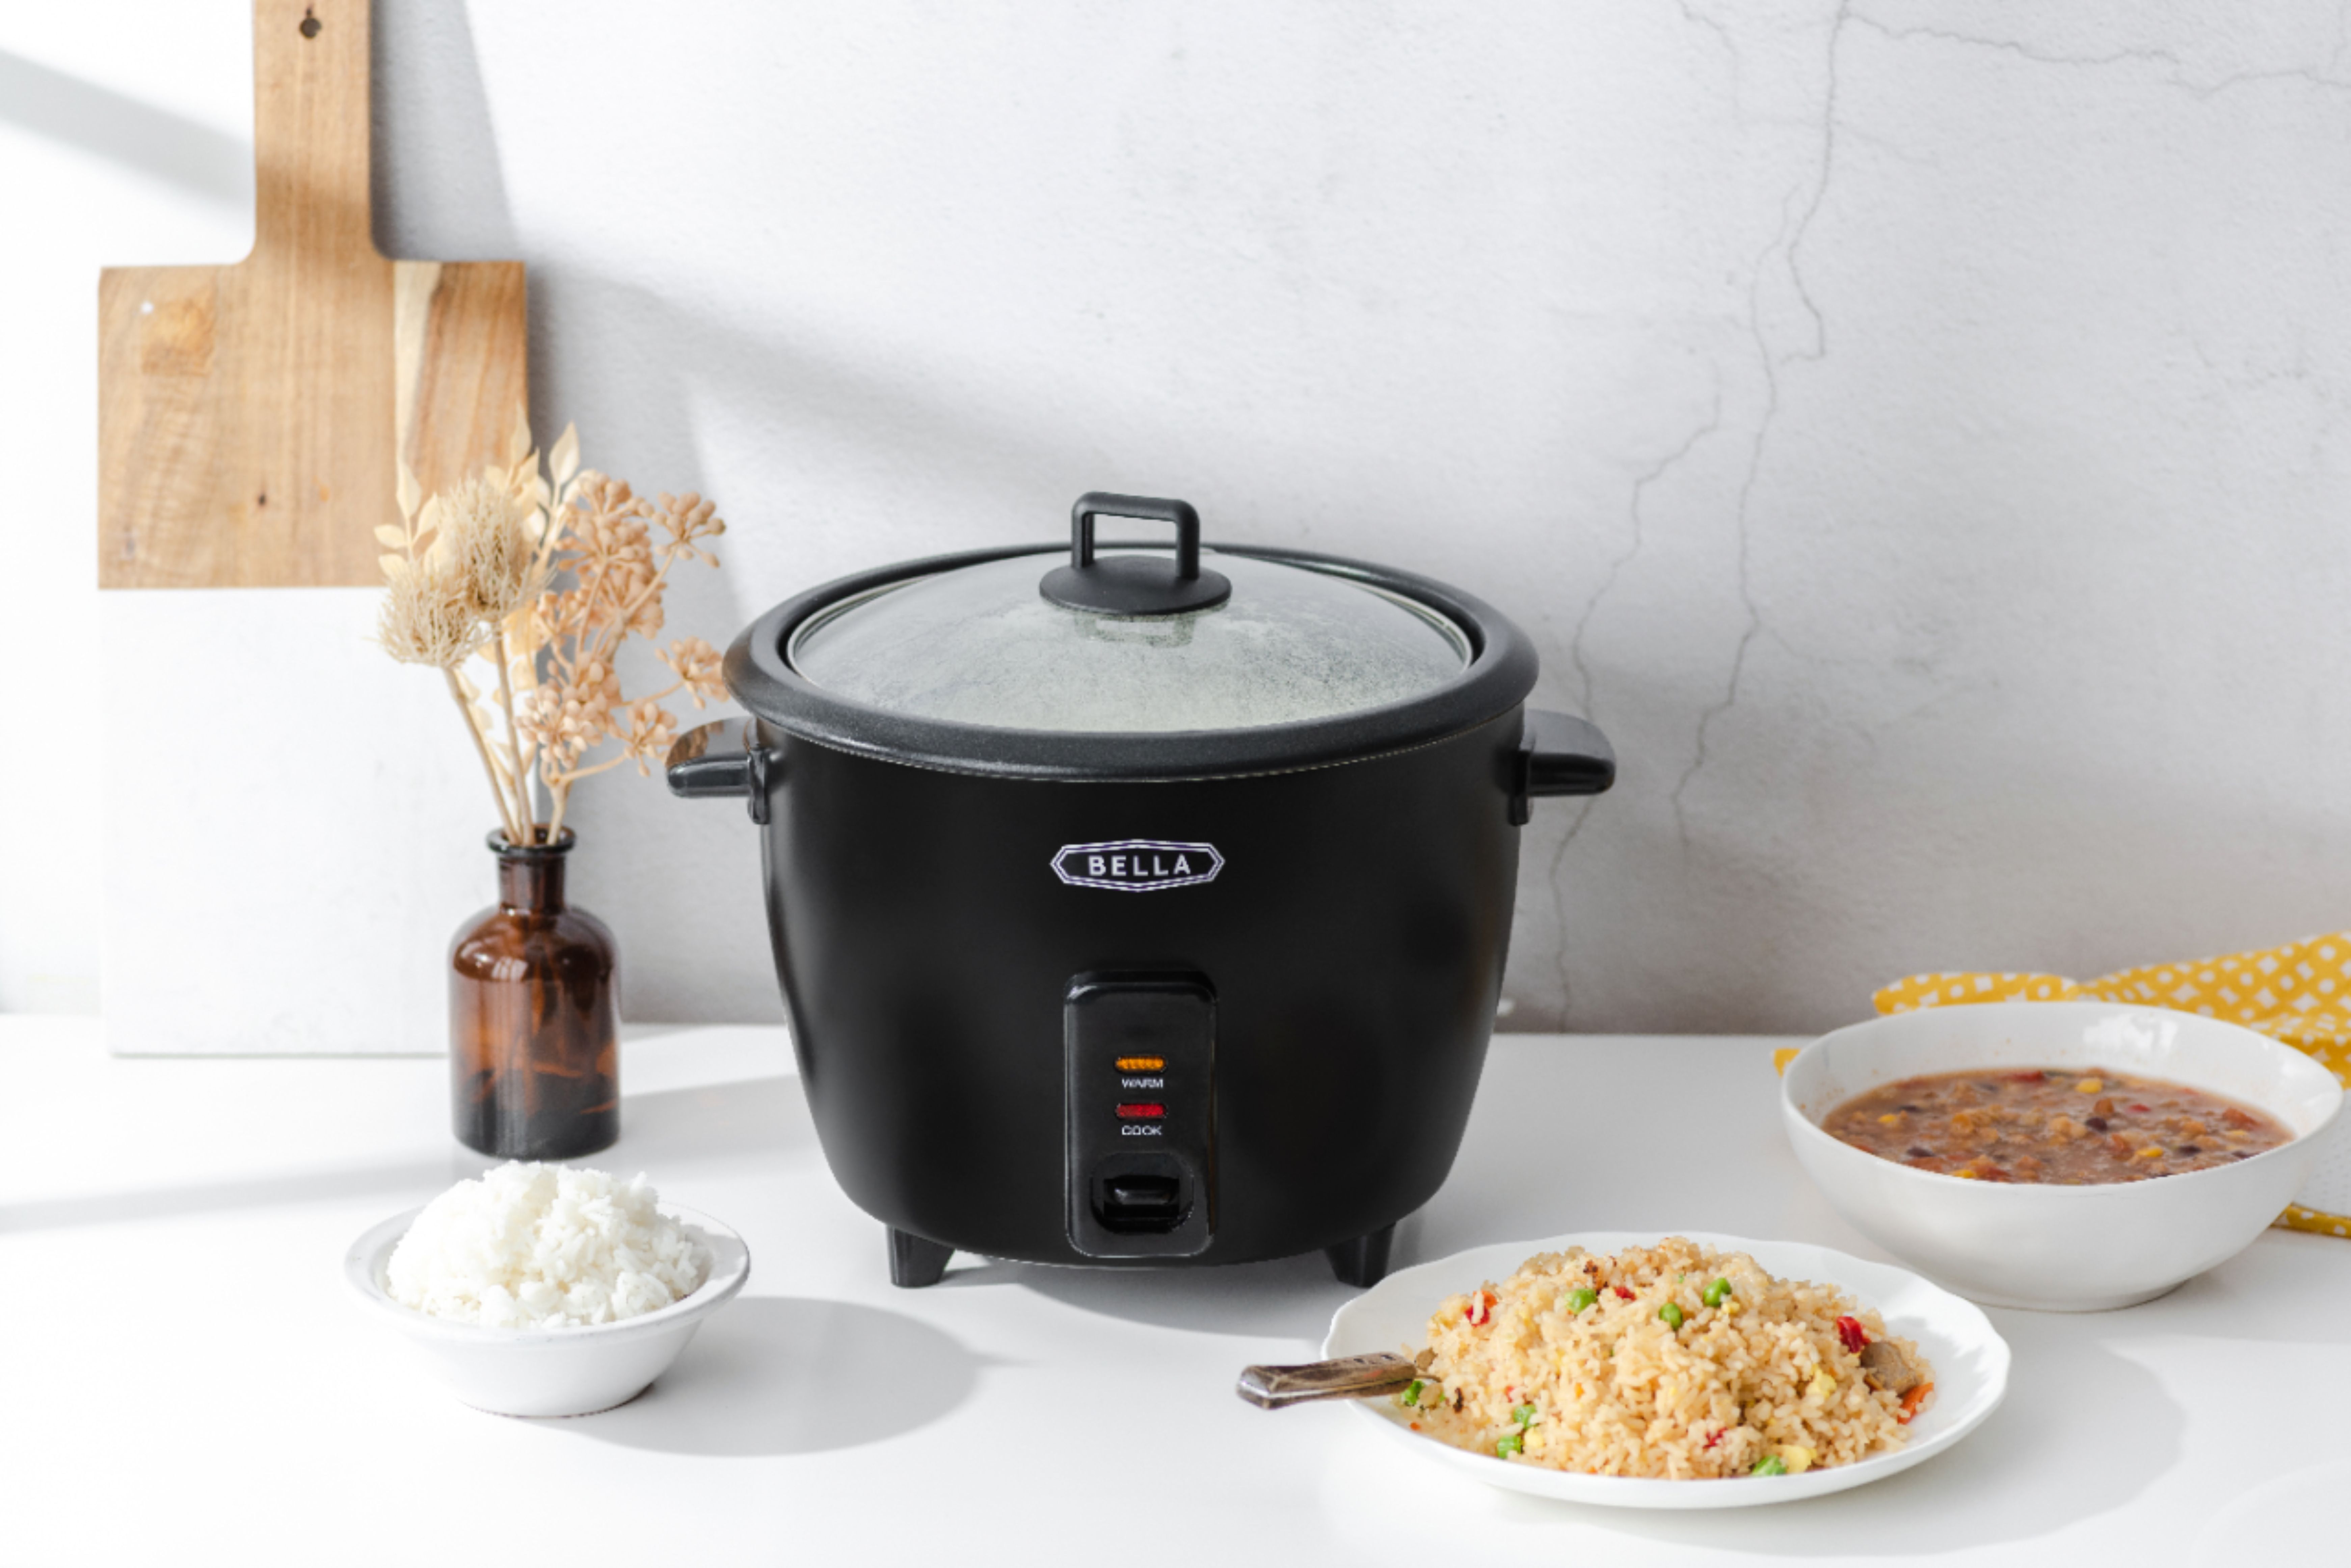 8-Cup Rice Cooker and Steamer (16-Cup Cooked)